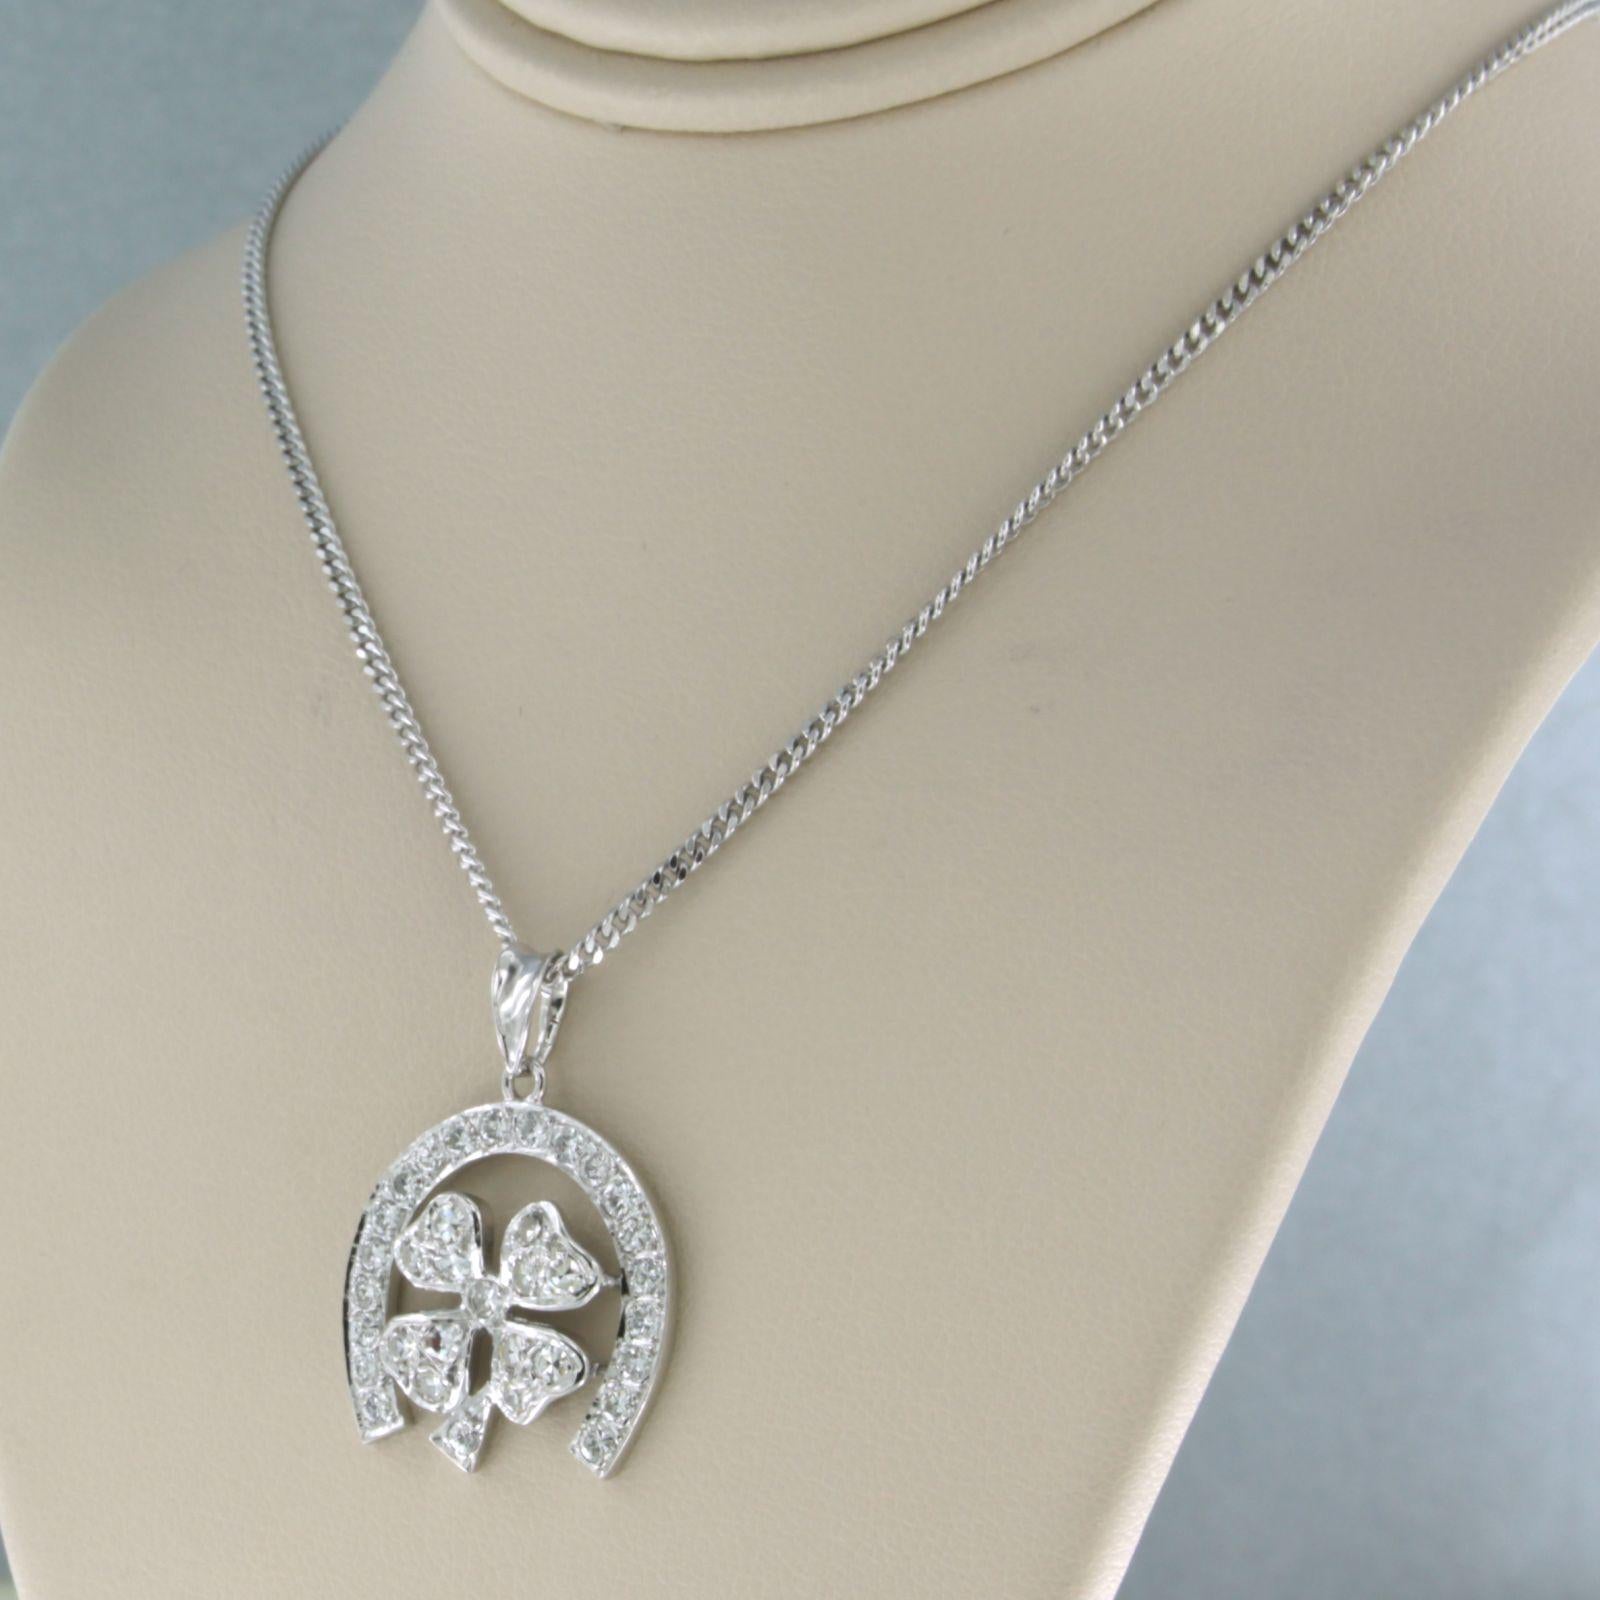 Brilliant Cut Lucky Charm Irish Leaves Pendant with Diamonds, with 14k Gold Necklace For Sale